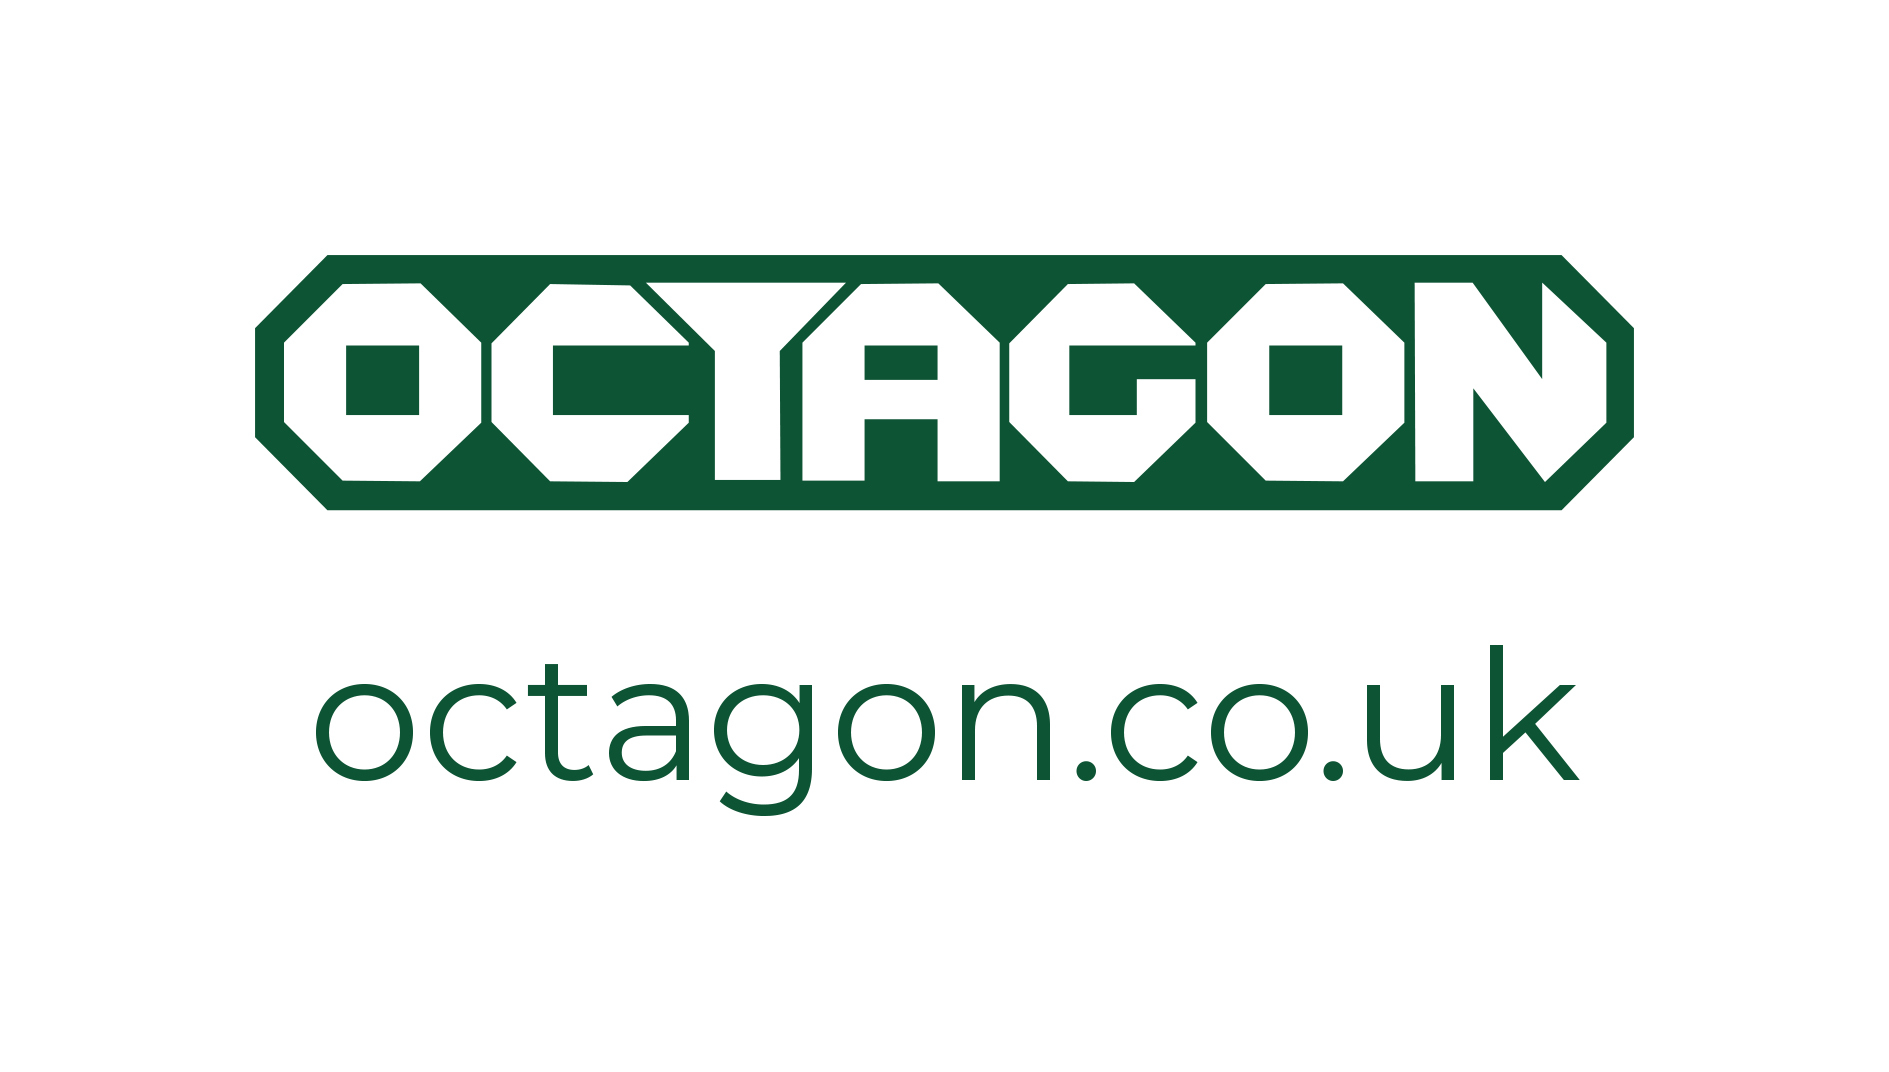 Octagon logo with website